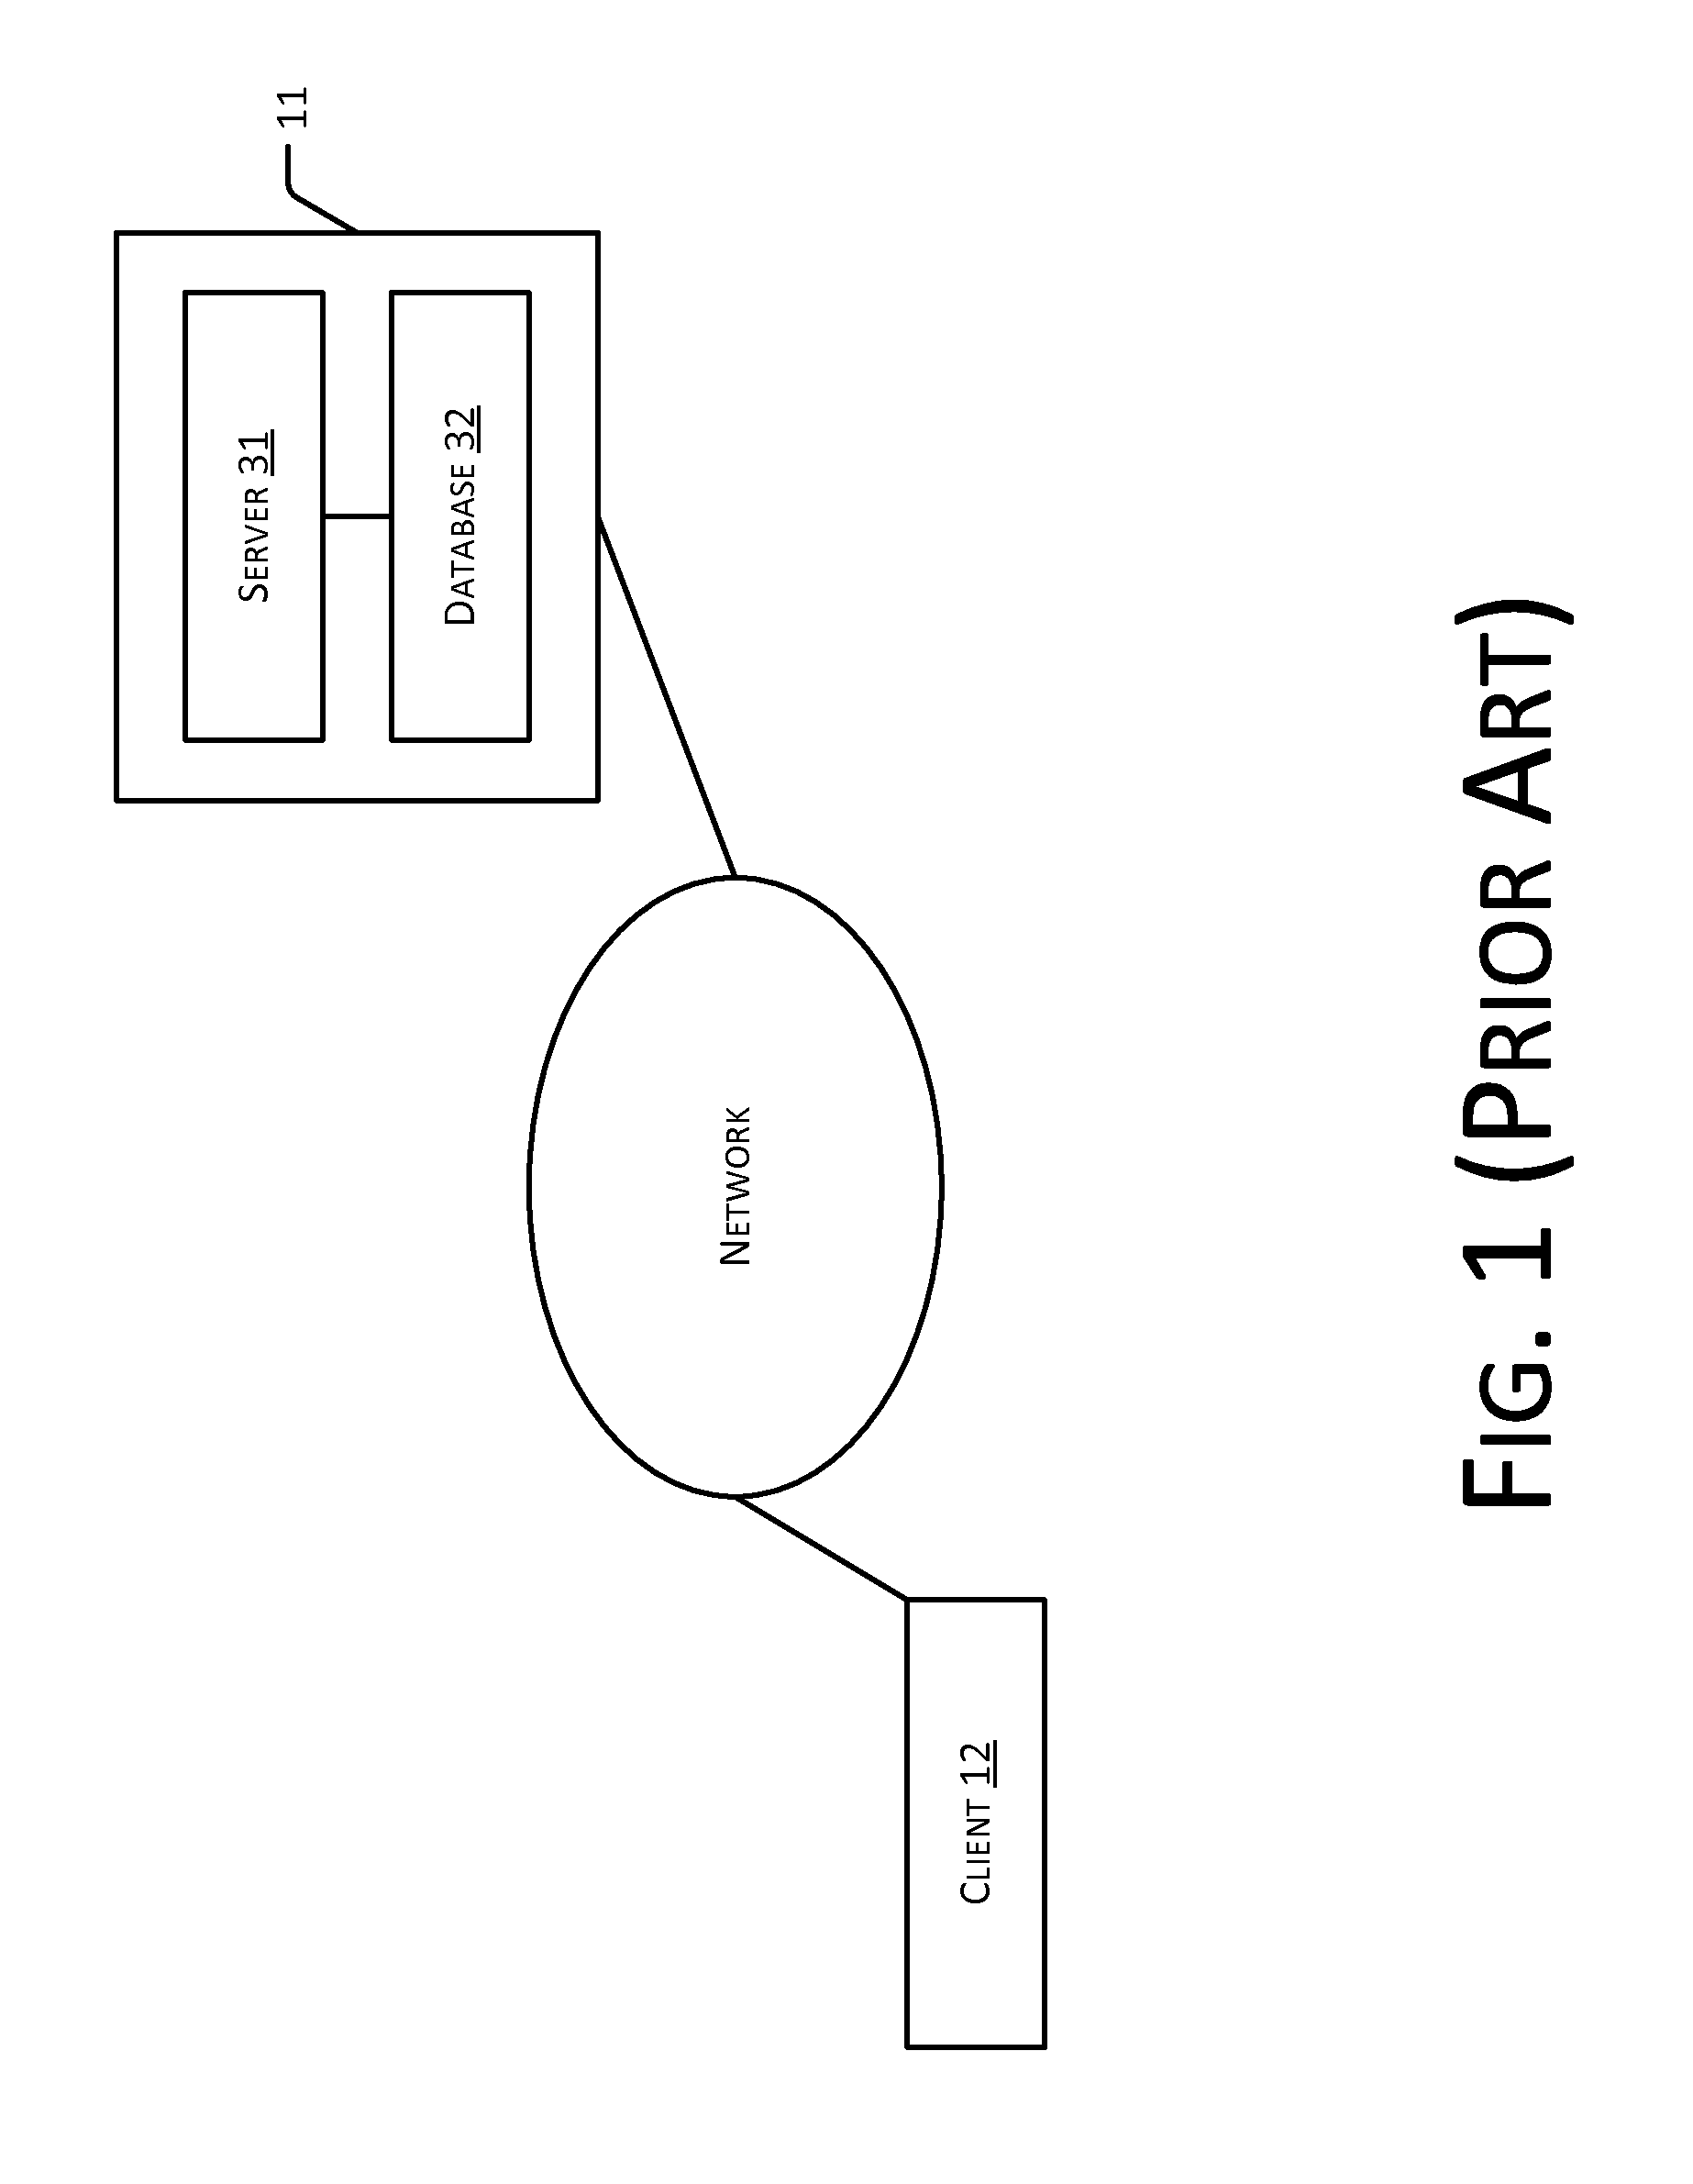 Method and system for account parallel processing